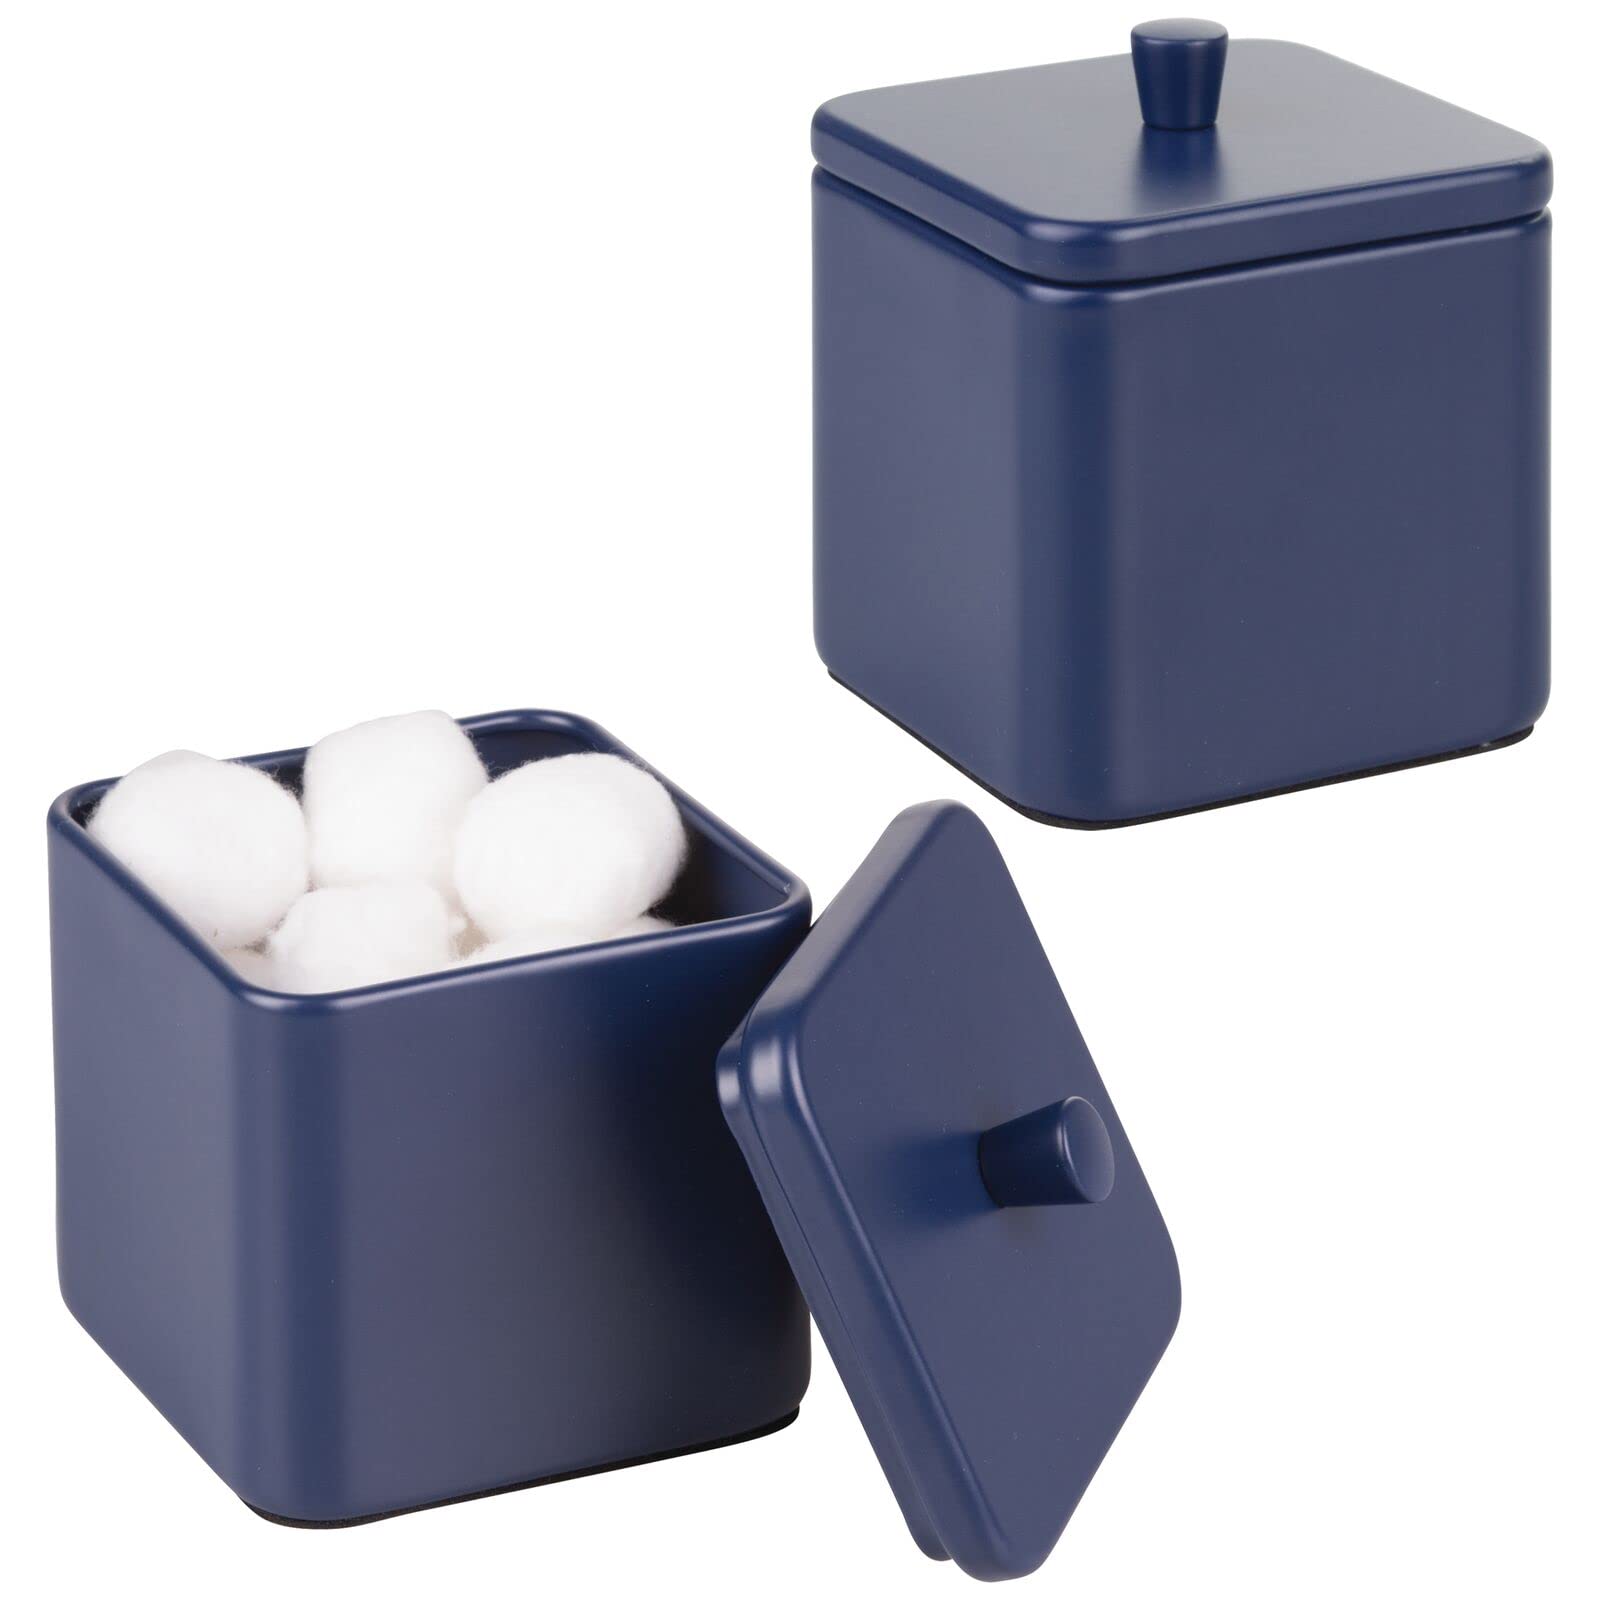 Book Cover mDesign Small Metal Square Bathroom Apothecary Storage Organizer Canister Jars with Lid - Organization Holders for Vanity, Makeup Tables - Unity Collection, 2 Pack - Navy Blue Matte Navy